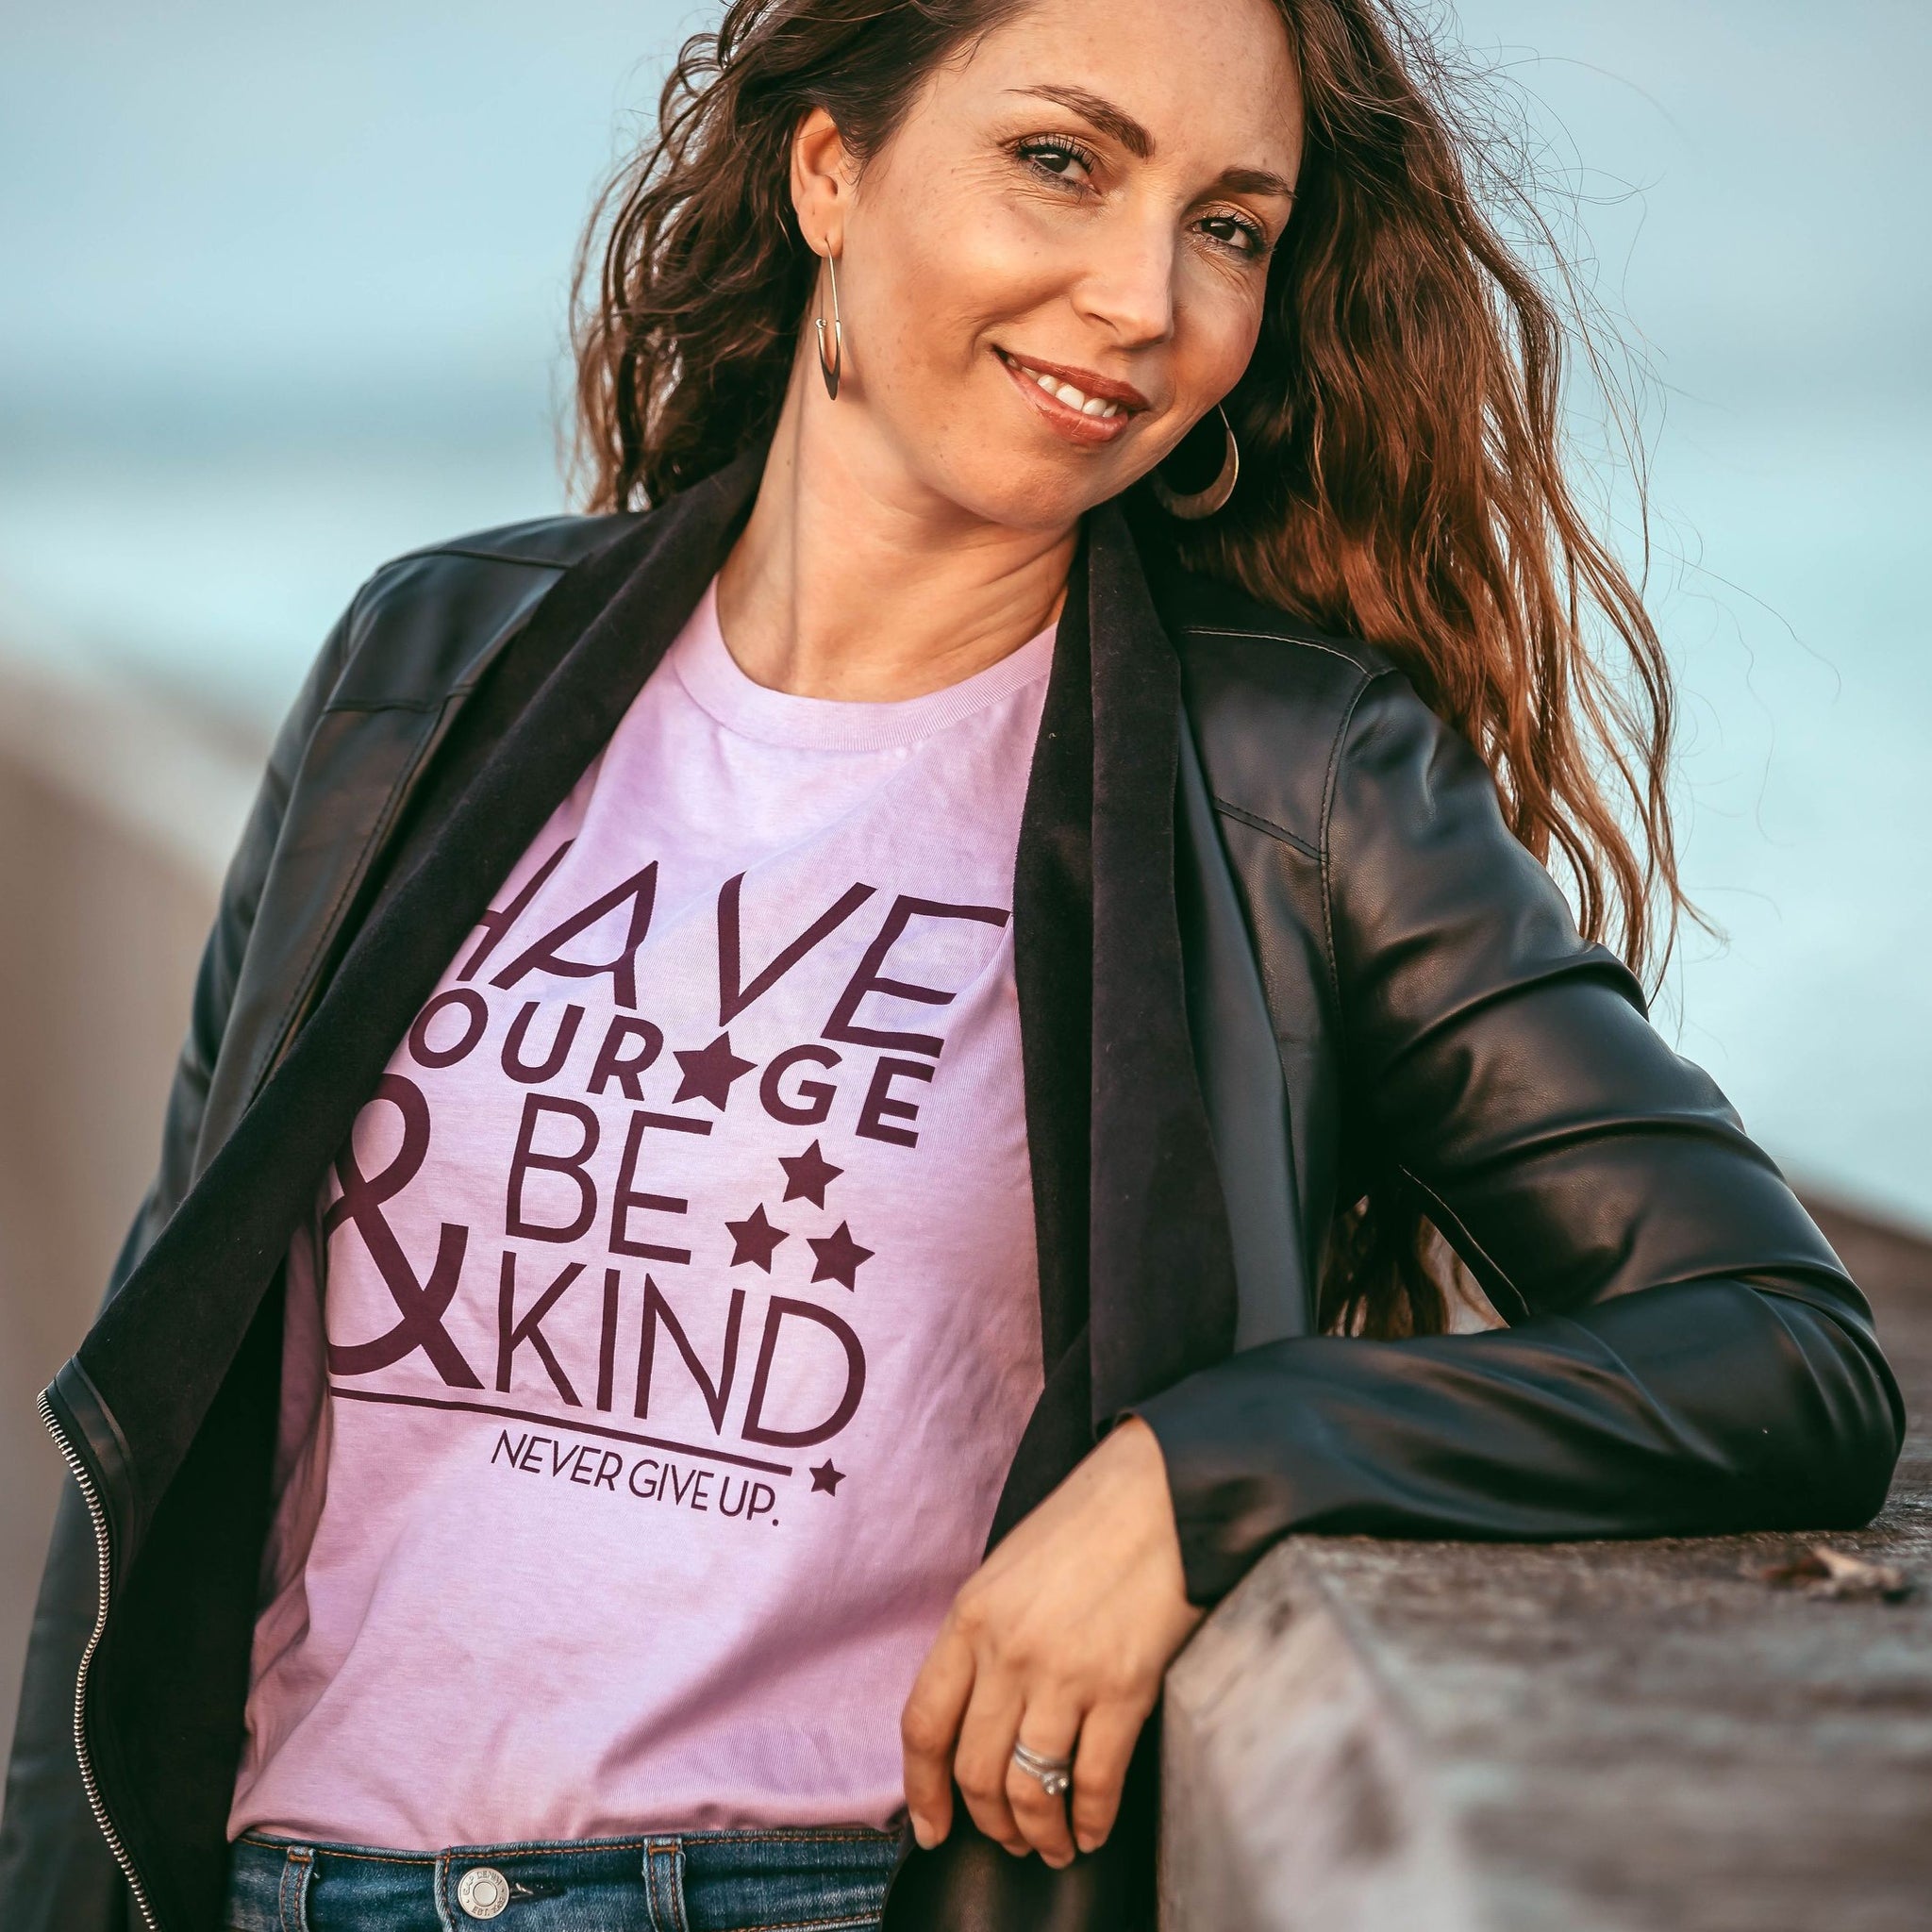 Brunette woman looking at camera wearing Have Courage & Be Kind tee